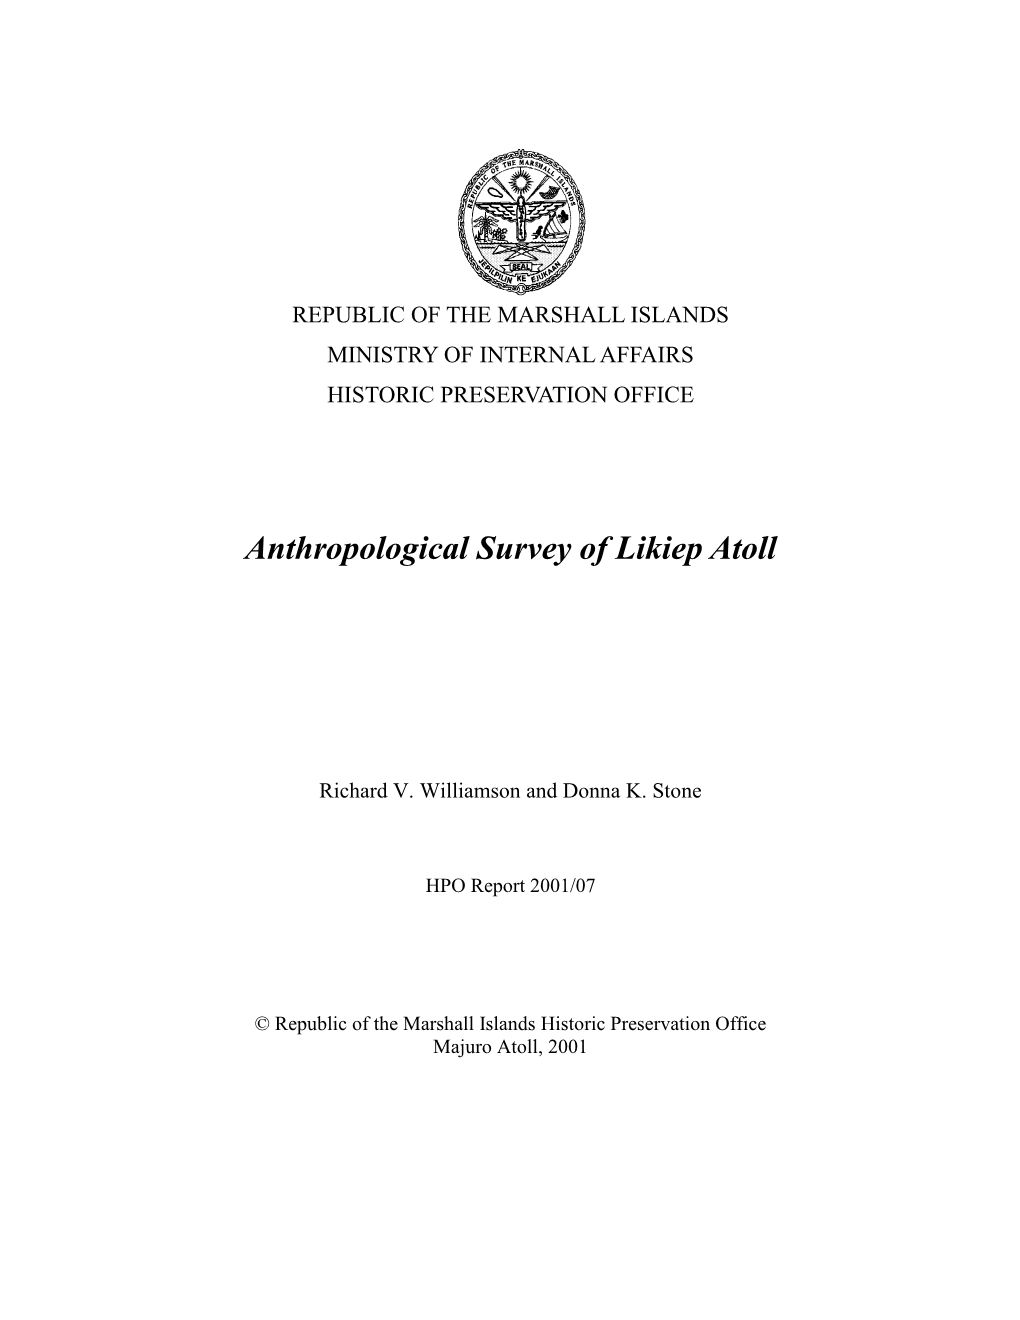 Anthropological Survey of Likiep Atoll